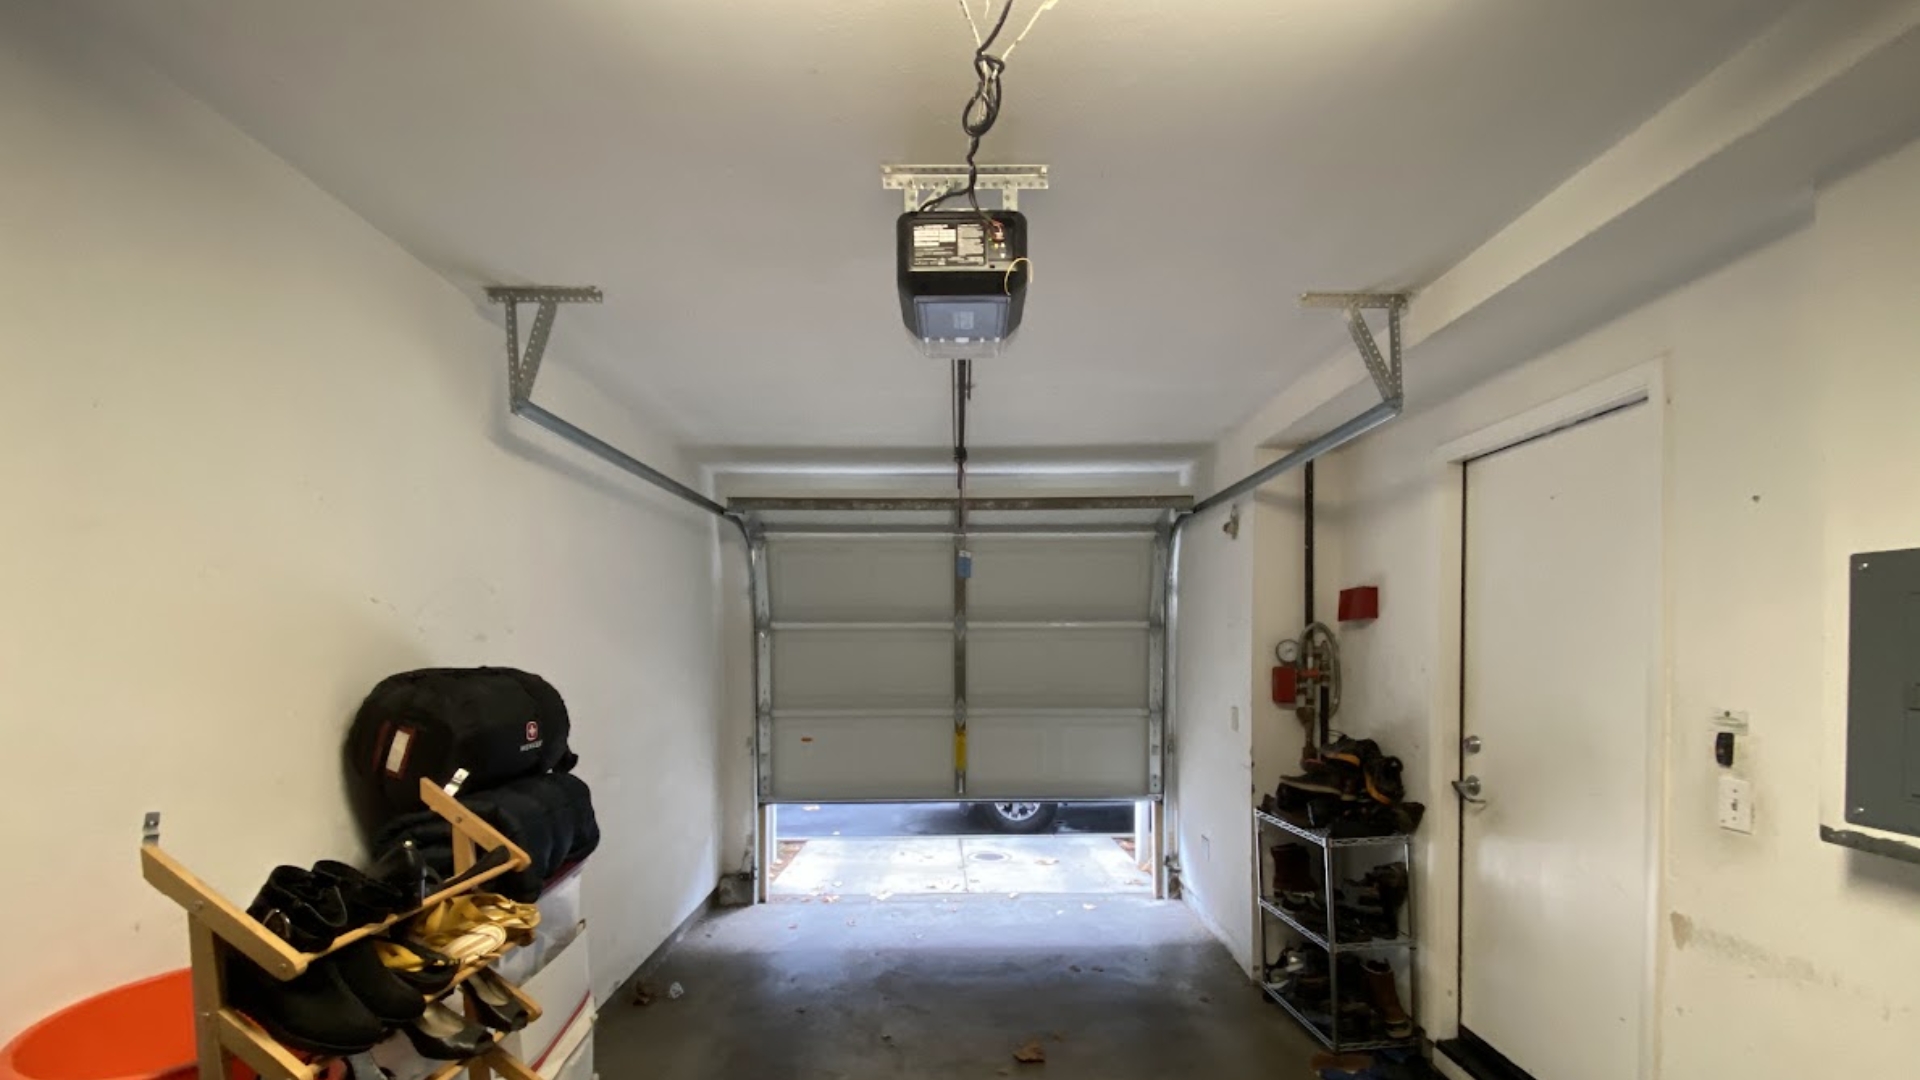 A garage door being tested for its travel limits